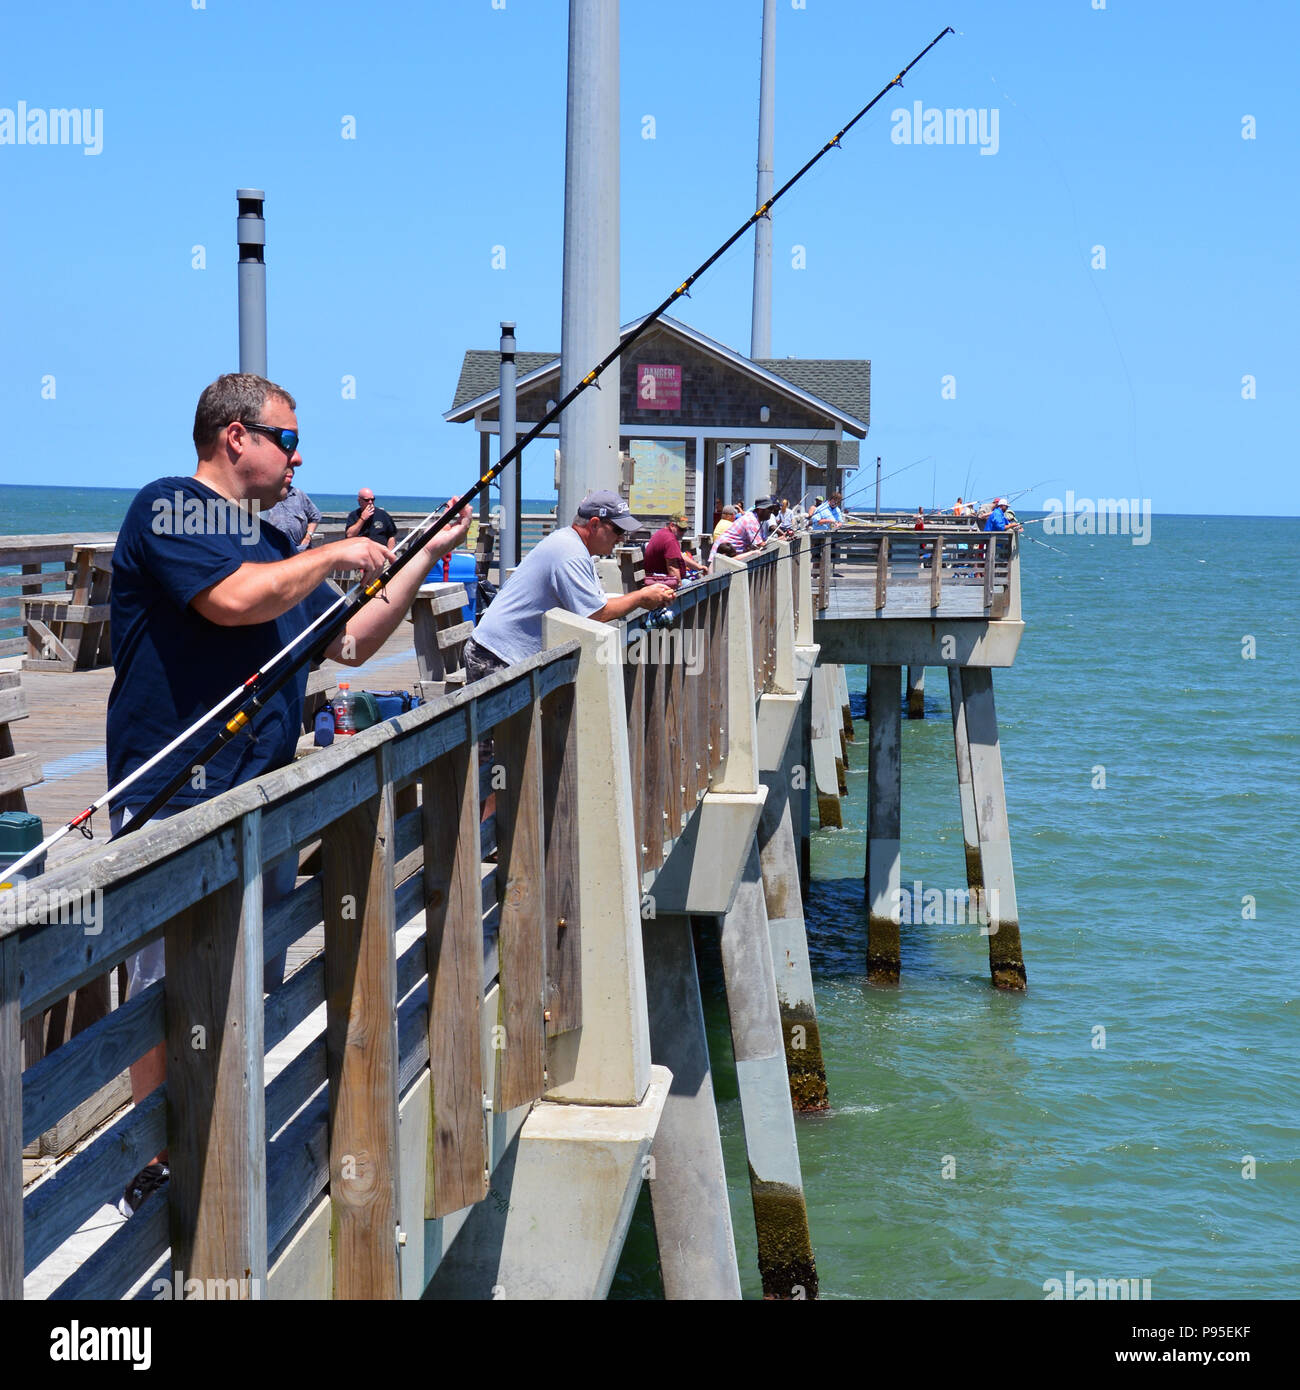 https://c8.alamy.com/comp/P95EKF/men-fishing-off-of-jenettes-pier-in-nags-head-on-the-outer-banks-of-north-carolina-P95EKF.jpg